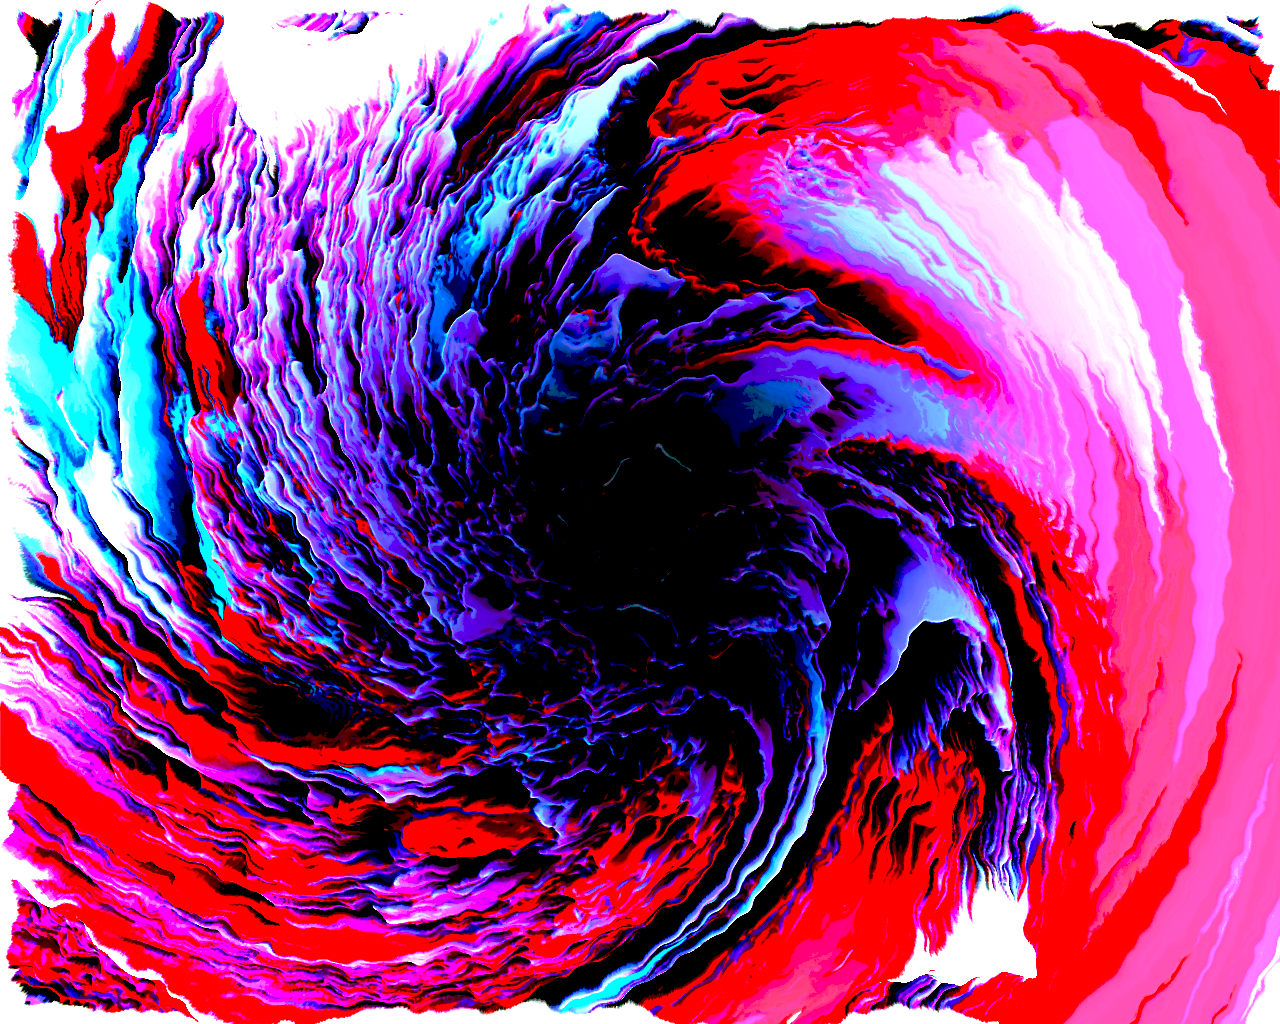 abstract, swirl Image for desktop